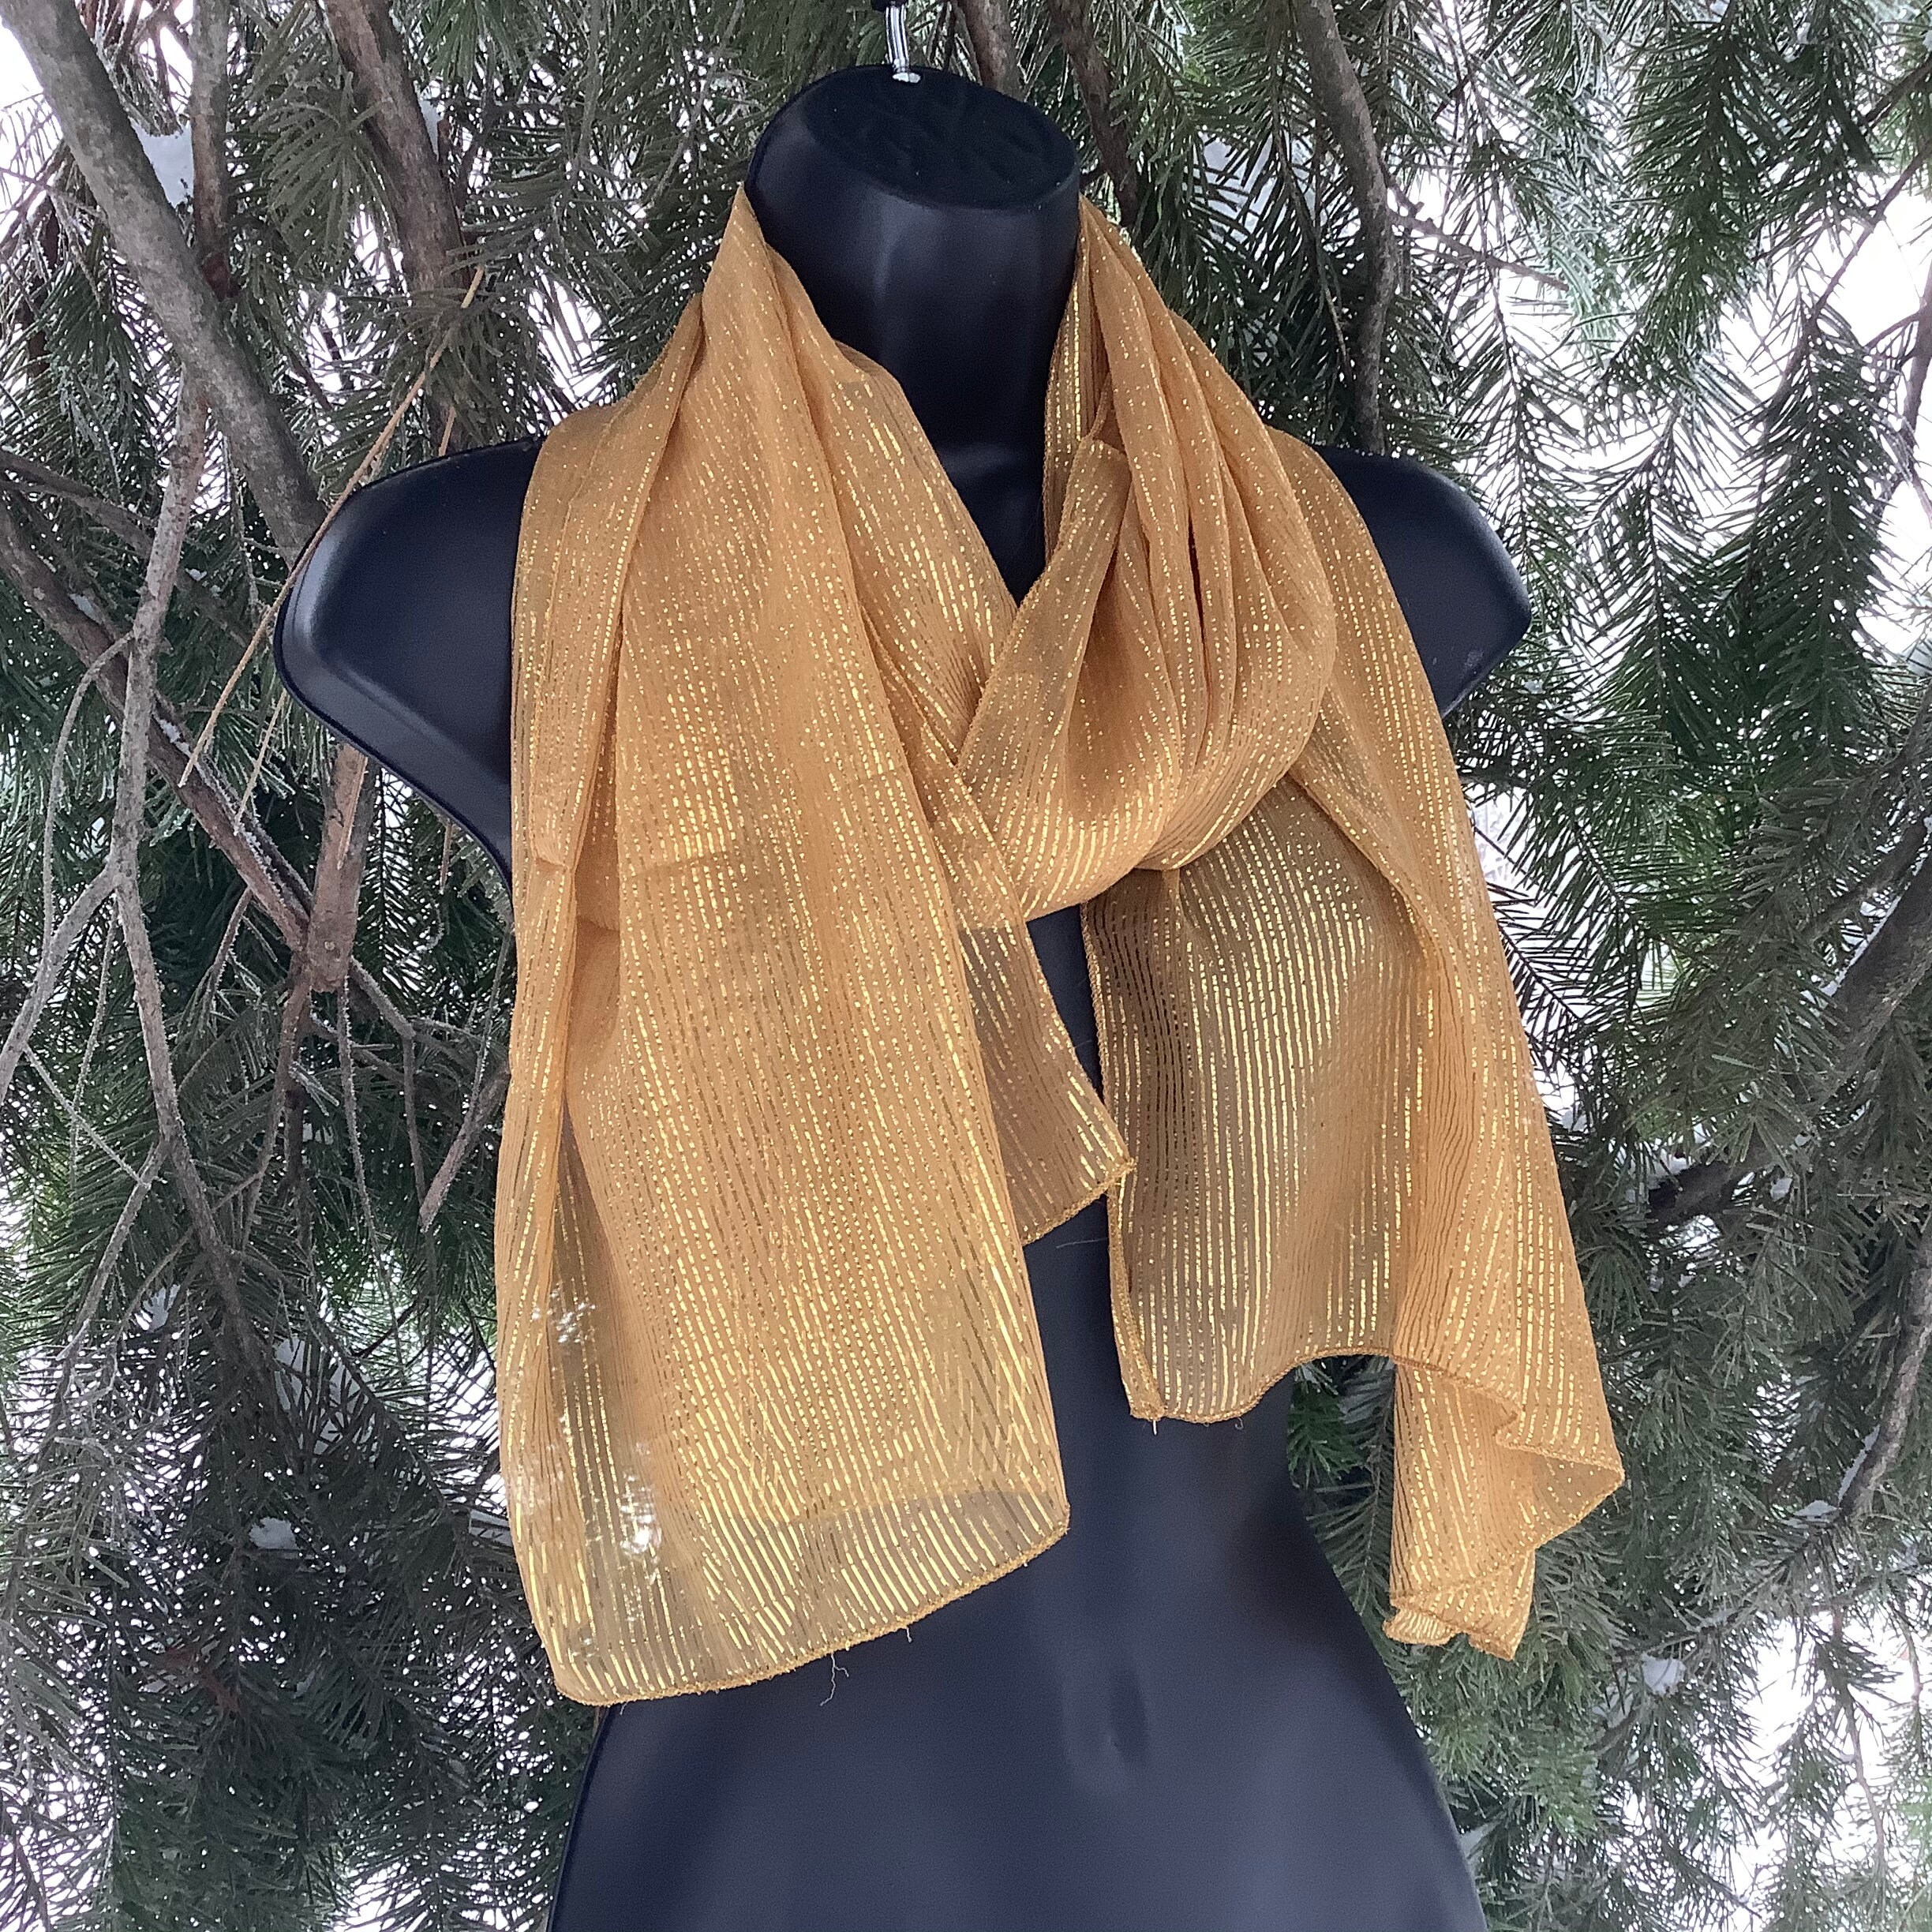 BlingScarves 35x35 Antique Gold Silk Scarf, Metallic Gold Silk Square Scarf, Mothers Day Gift for Mother in Law Gift for Friend, Sparkly Silk Head Scarf